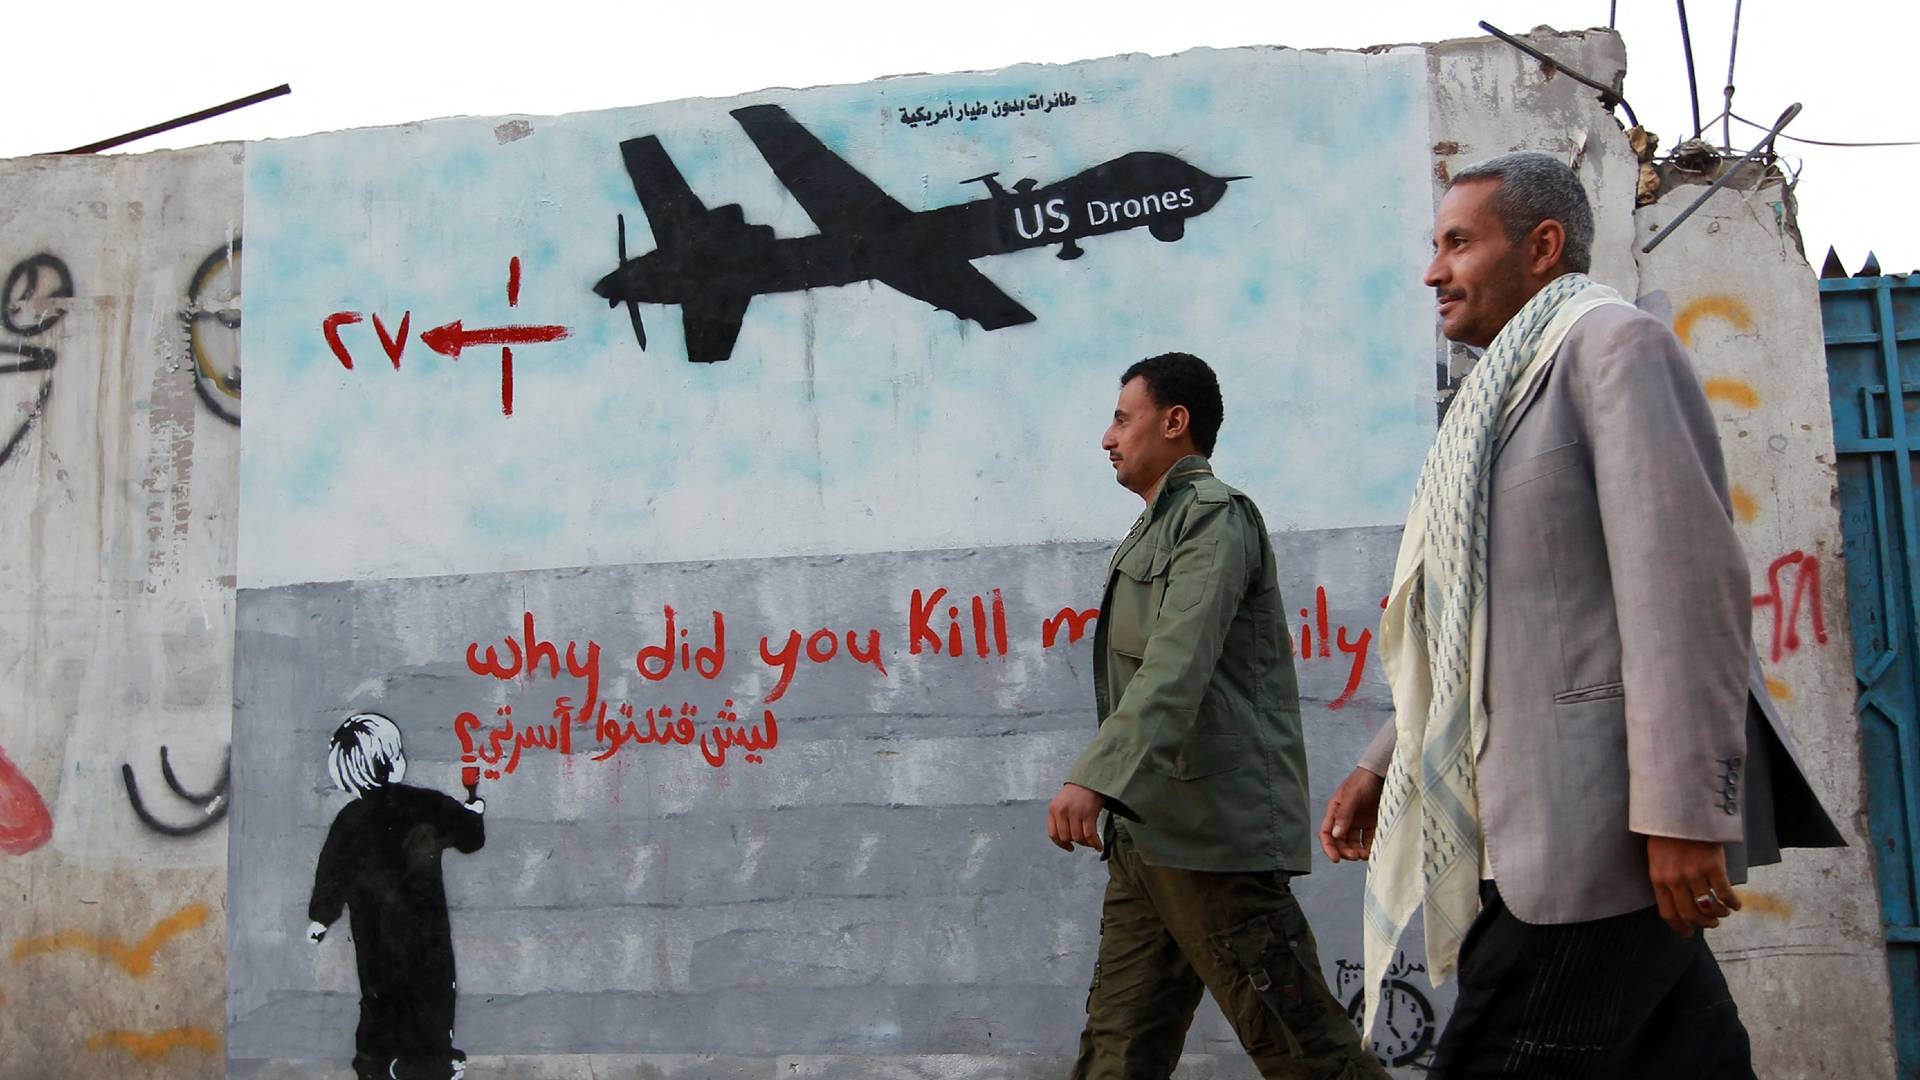 Yemeni men walk past a mural depicting a US drone and reading " Why did you kill my family" on 13 December 2013 in the capital Sanaa.